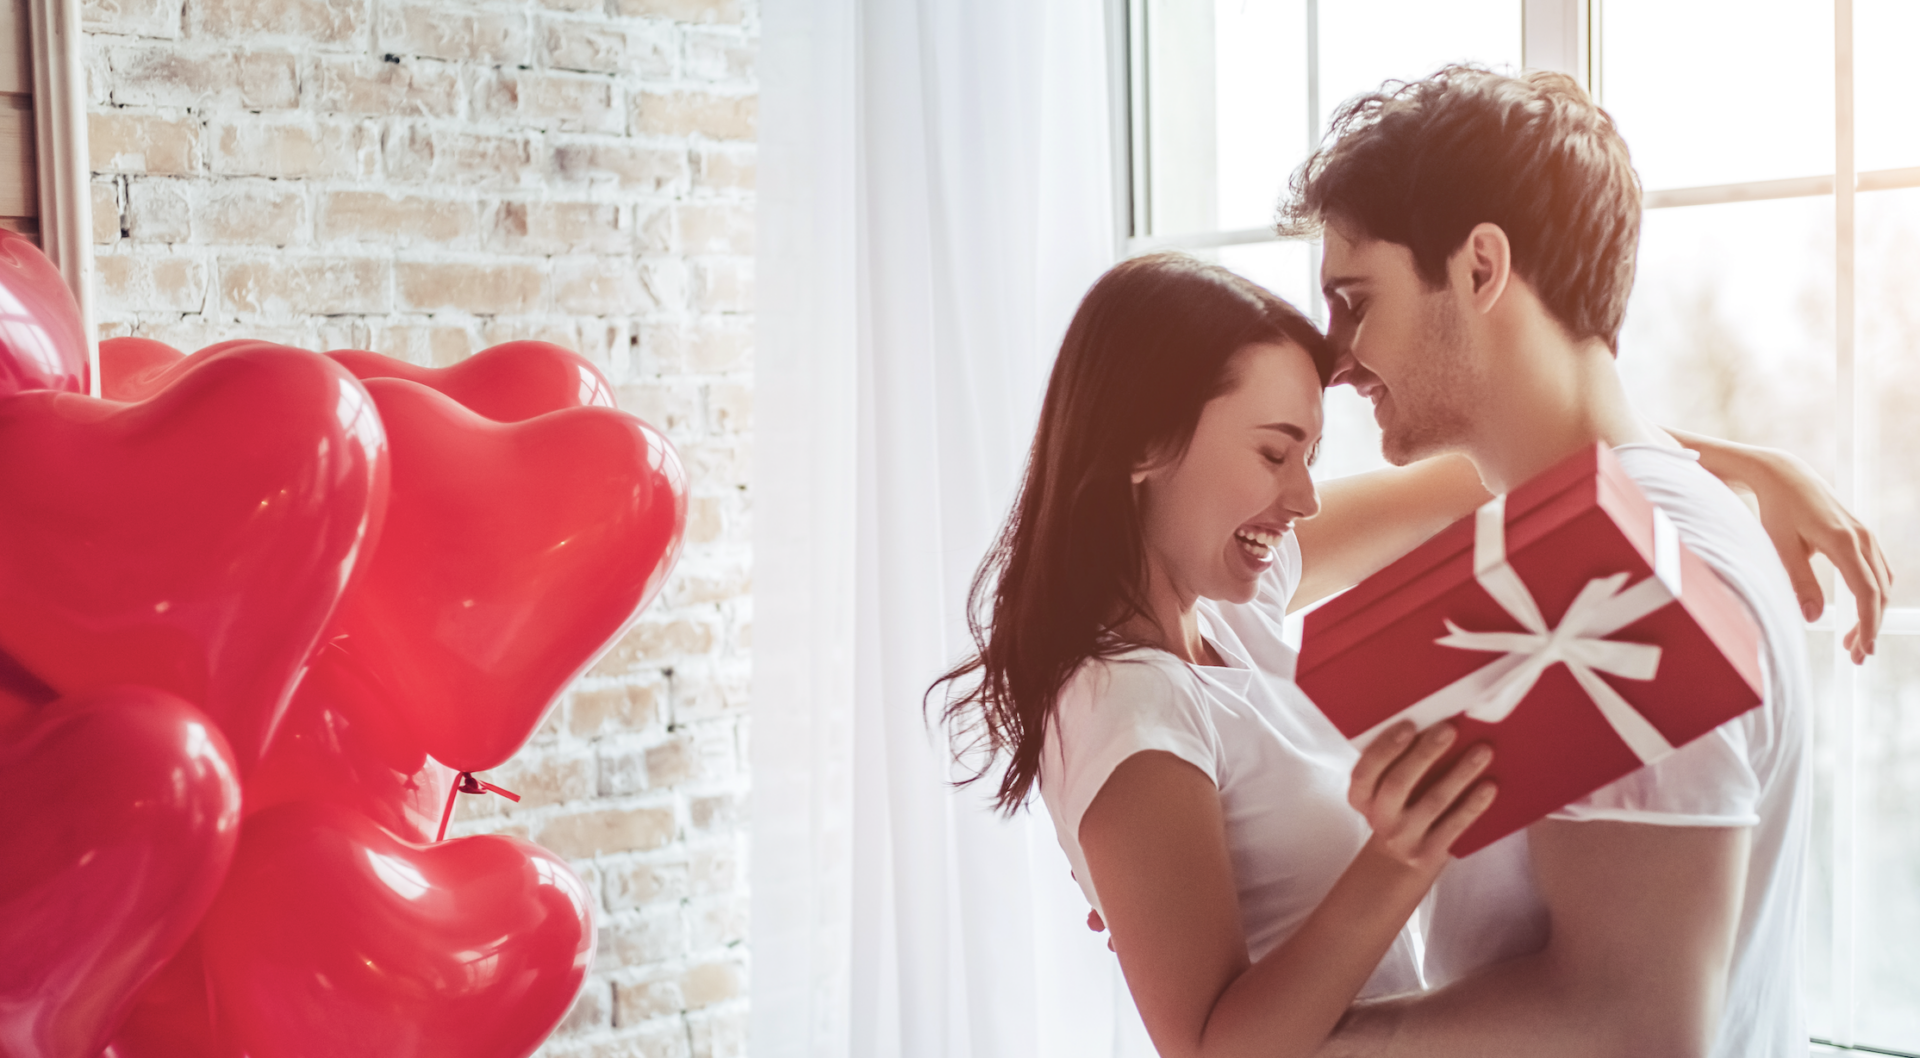 new open relationship feature image. Girl and guy embrace holding red gift, by red balloons.